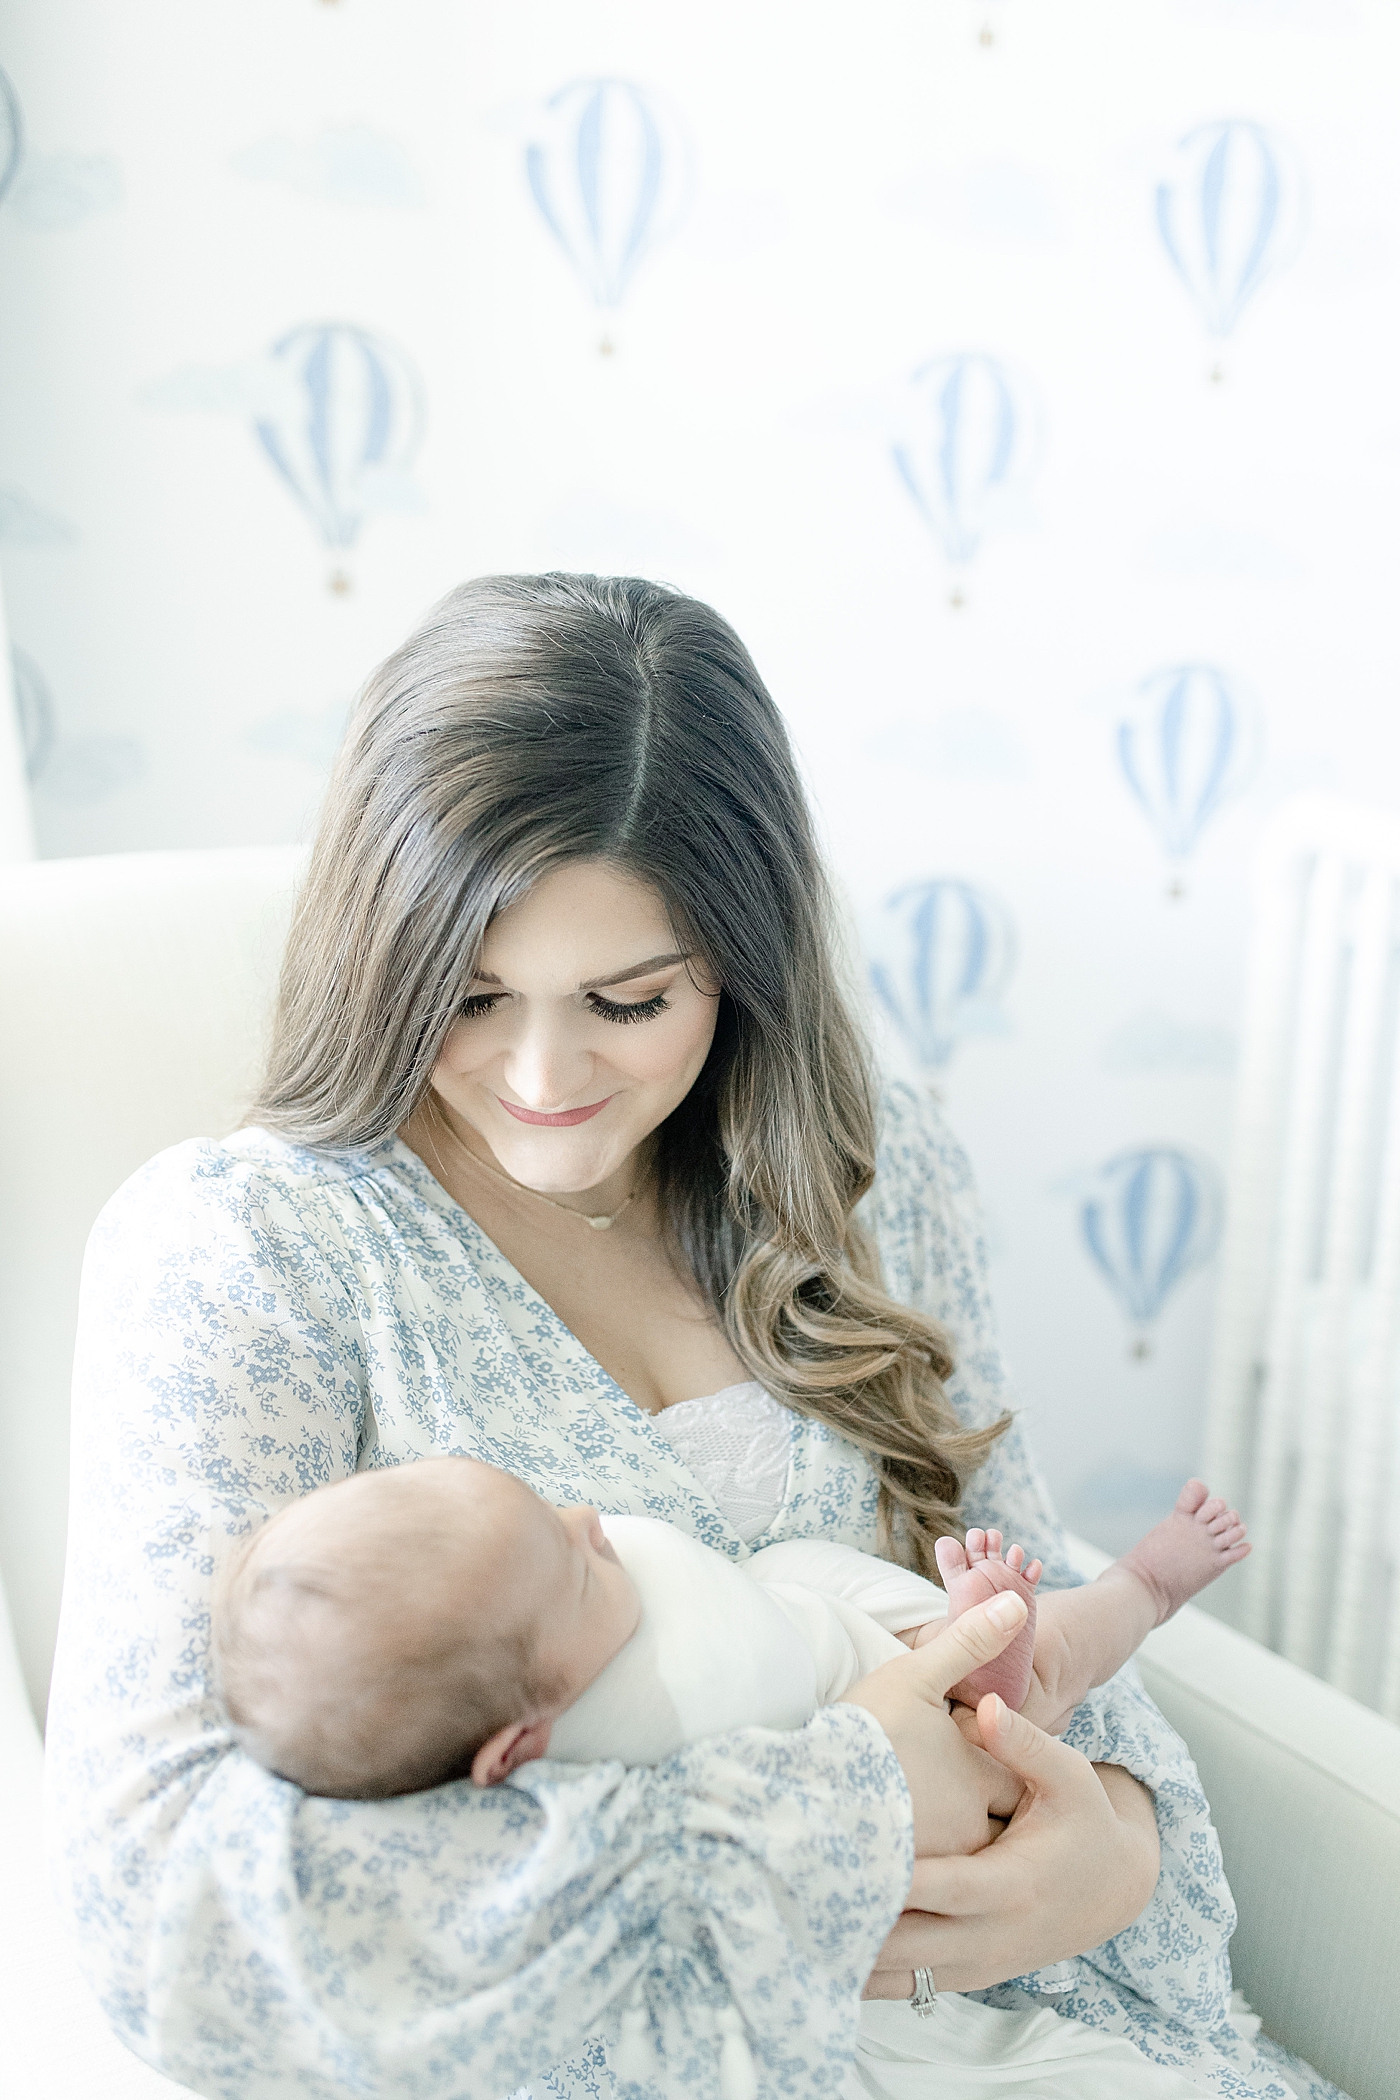 Mom smiling down on newborn baby boy she's holding | Photo by Little Sunshine Photography